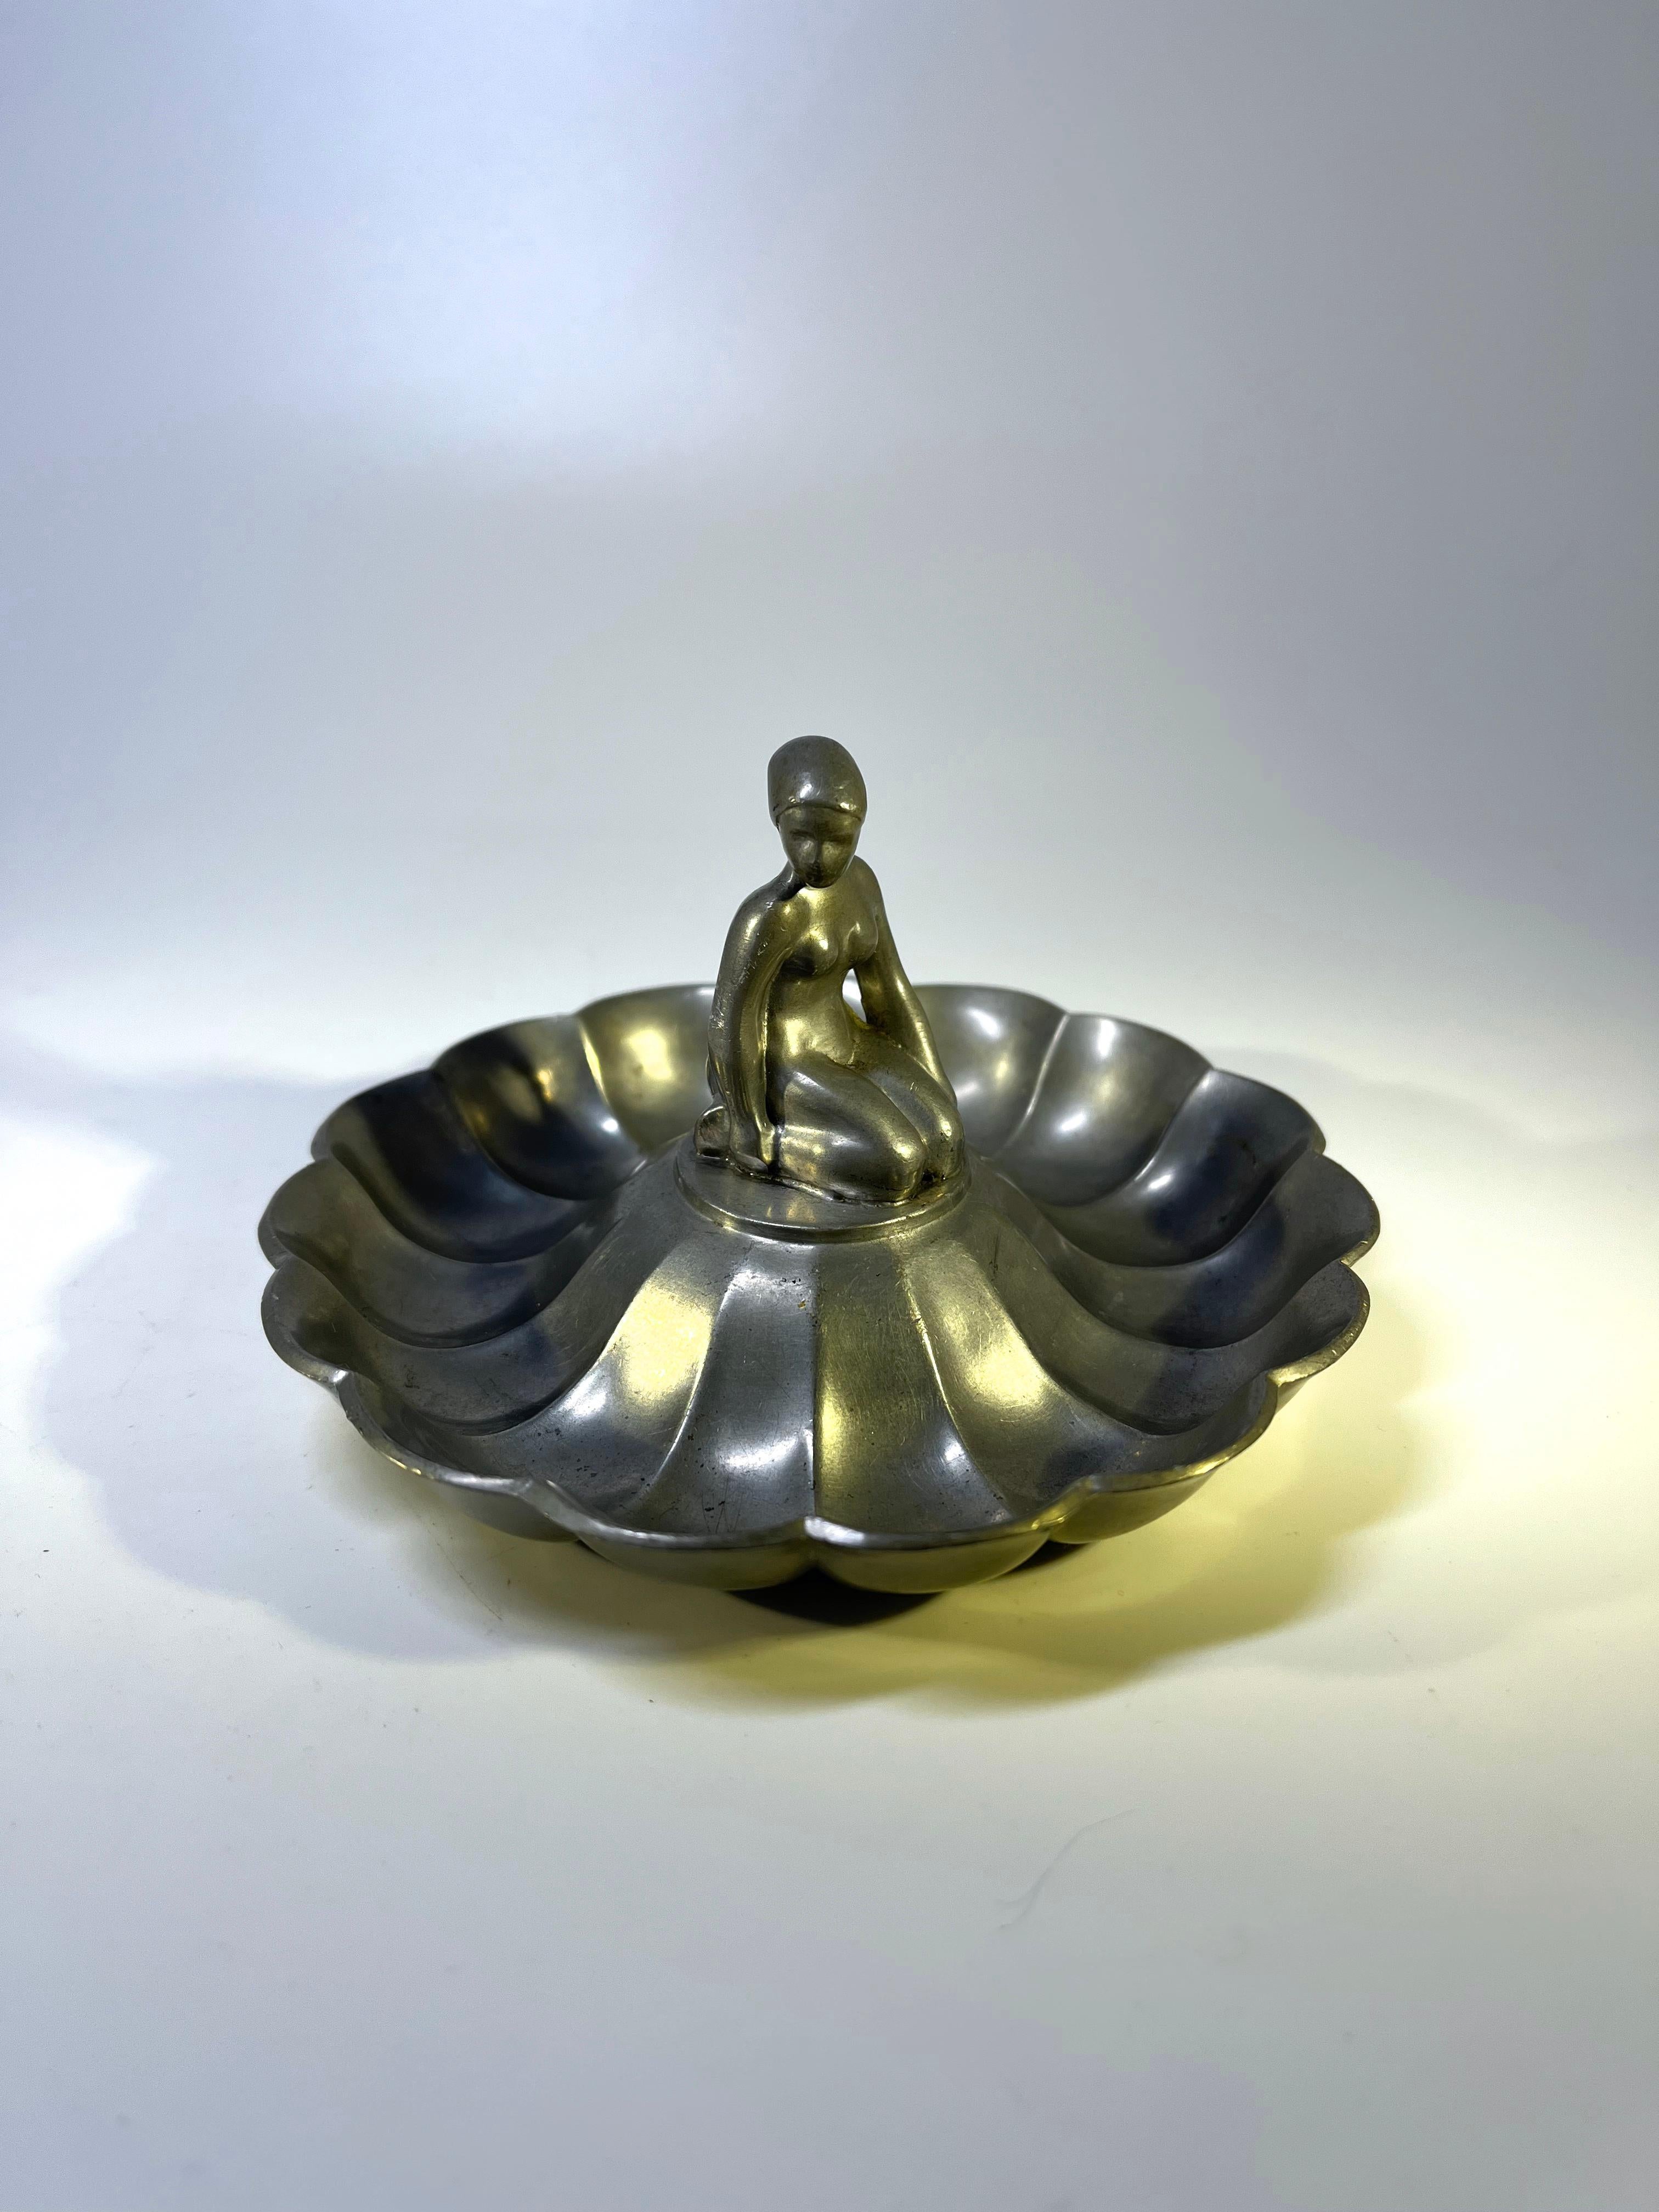 Fluted pewter Just Andersen of Denmark, 1930s Art Deco vide poche
The central figure of a kneeling figure bathing has superb detail and patina
Circa 1930's
Stamped and numbered 185 on base
Diameter 4.75 inch, Height 2.5 inch
Very good